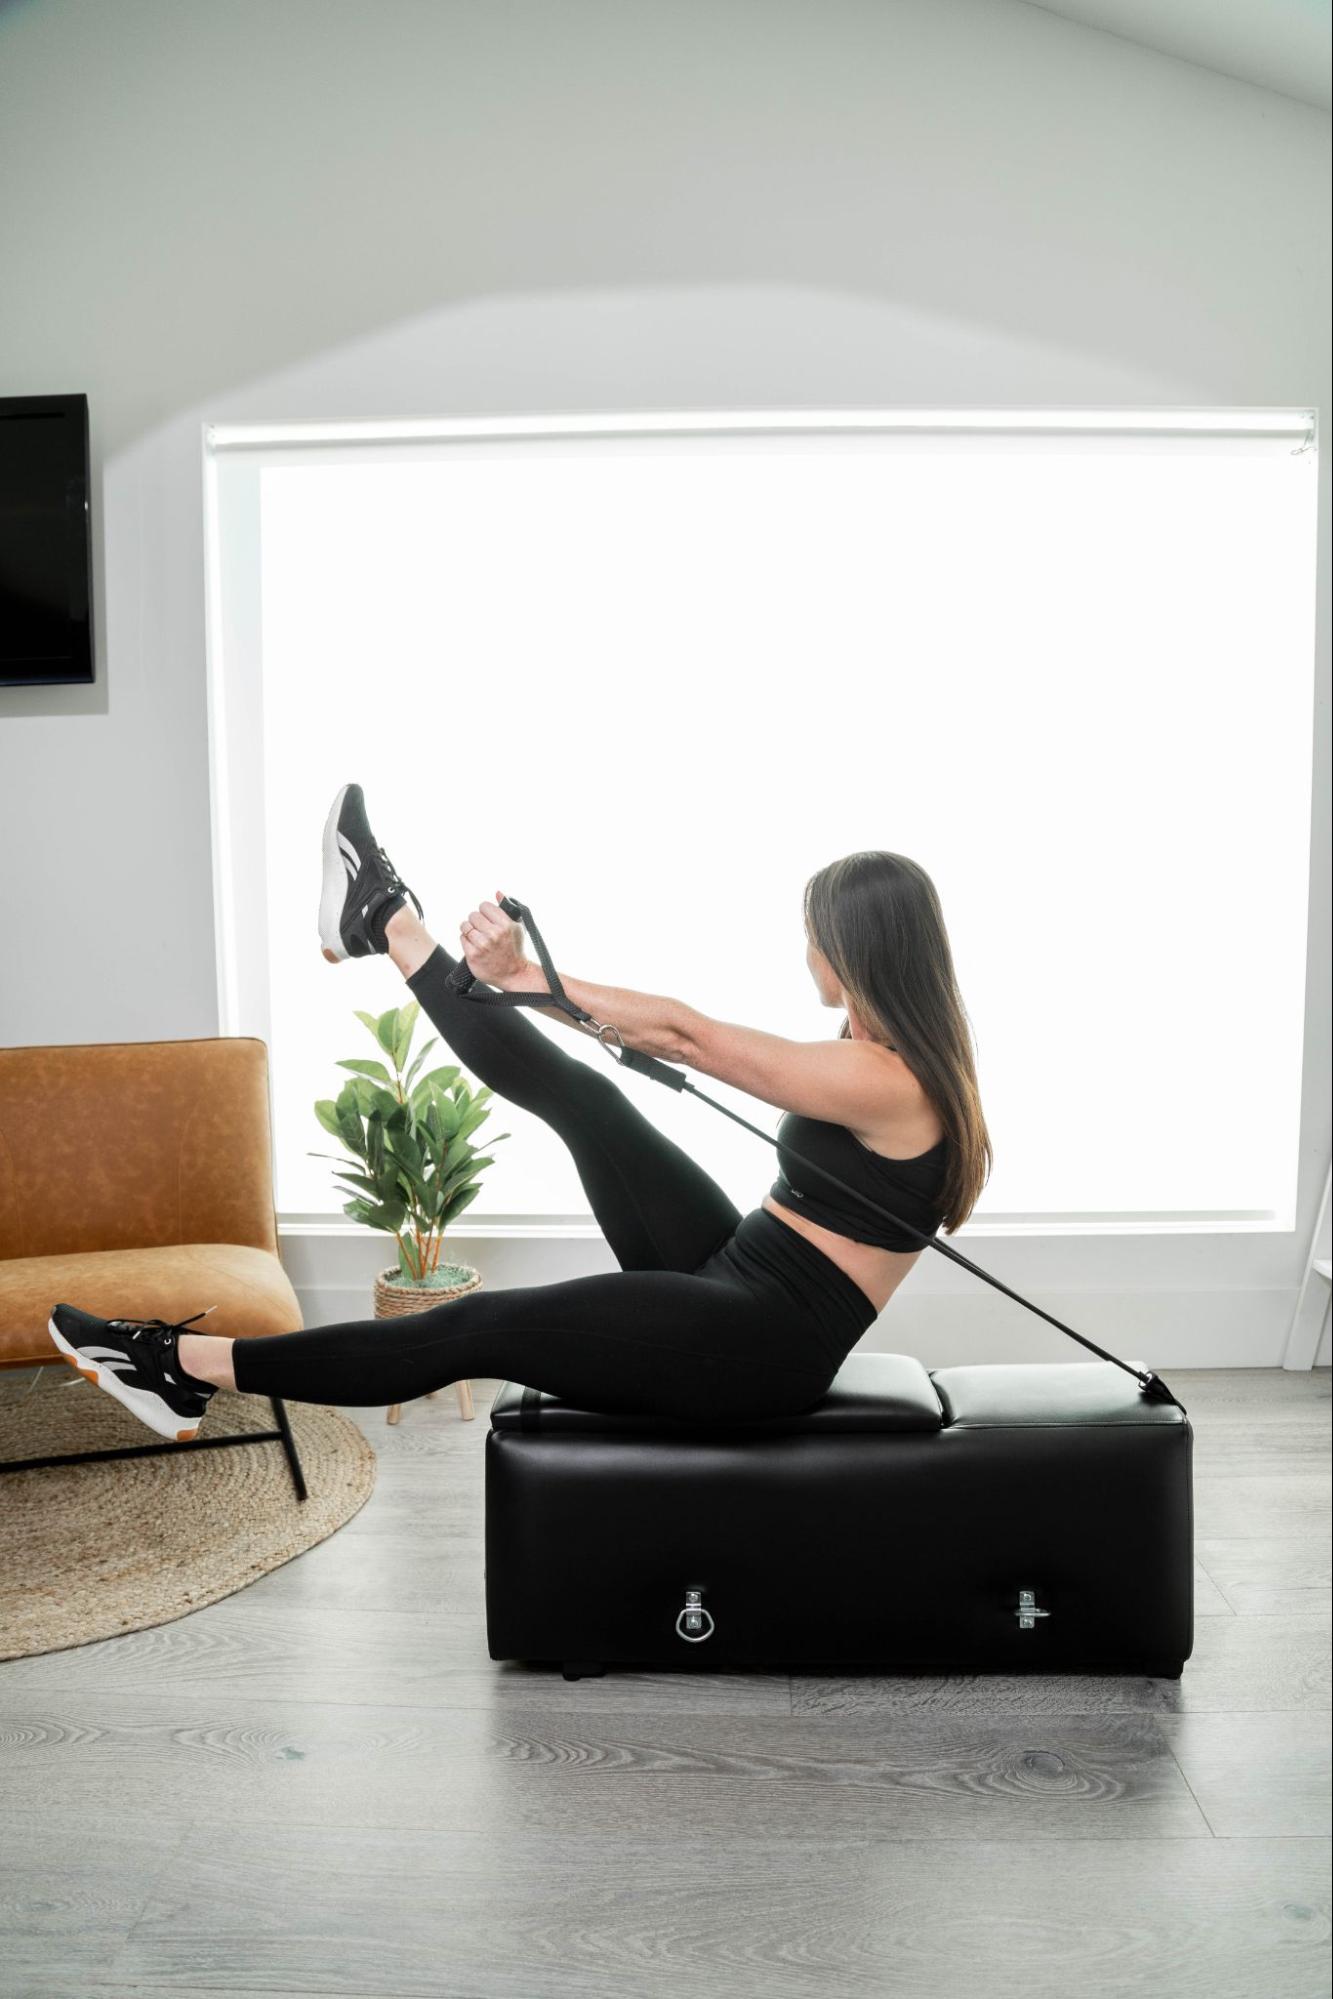 A model uses a workout bench by Zeno Gym next to a couch in a living room setting.